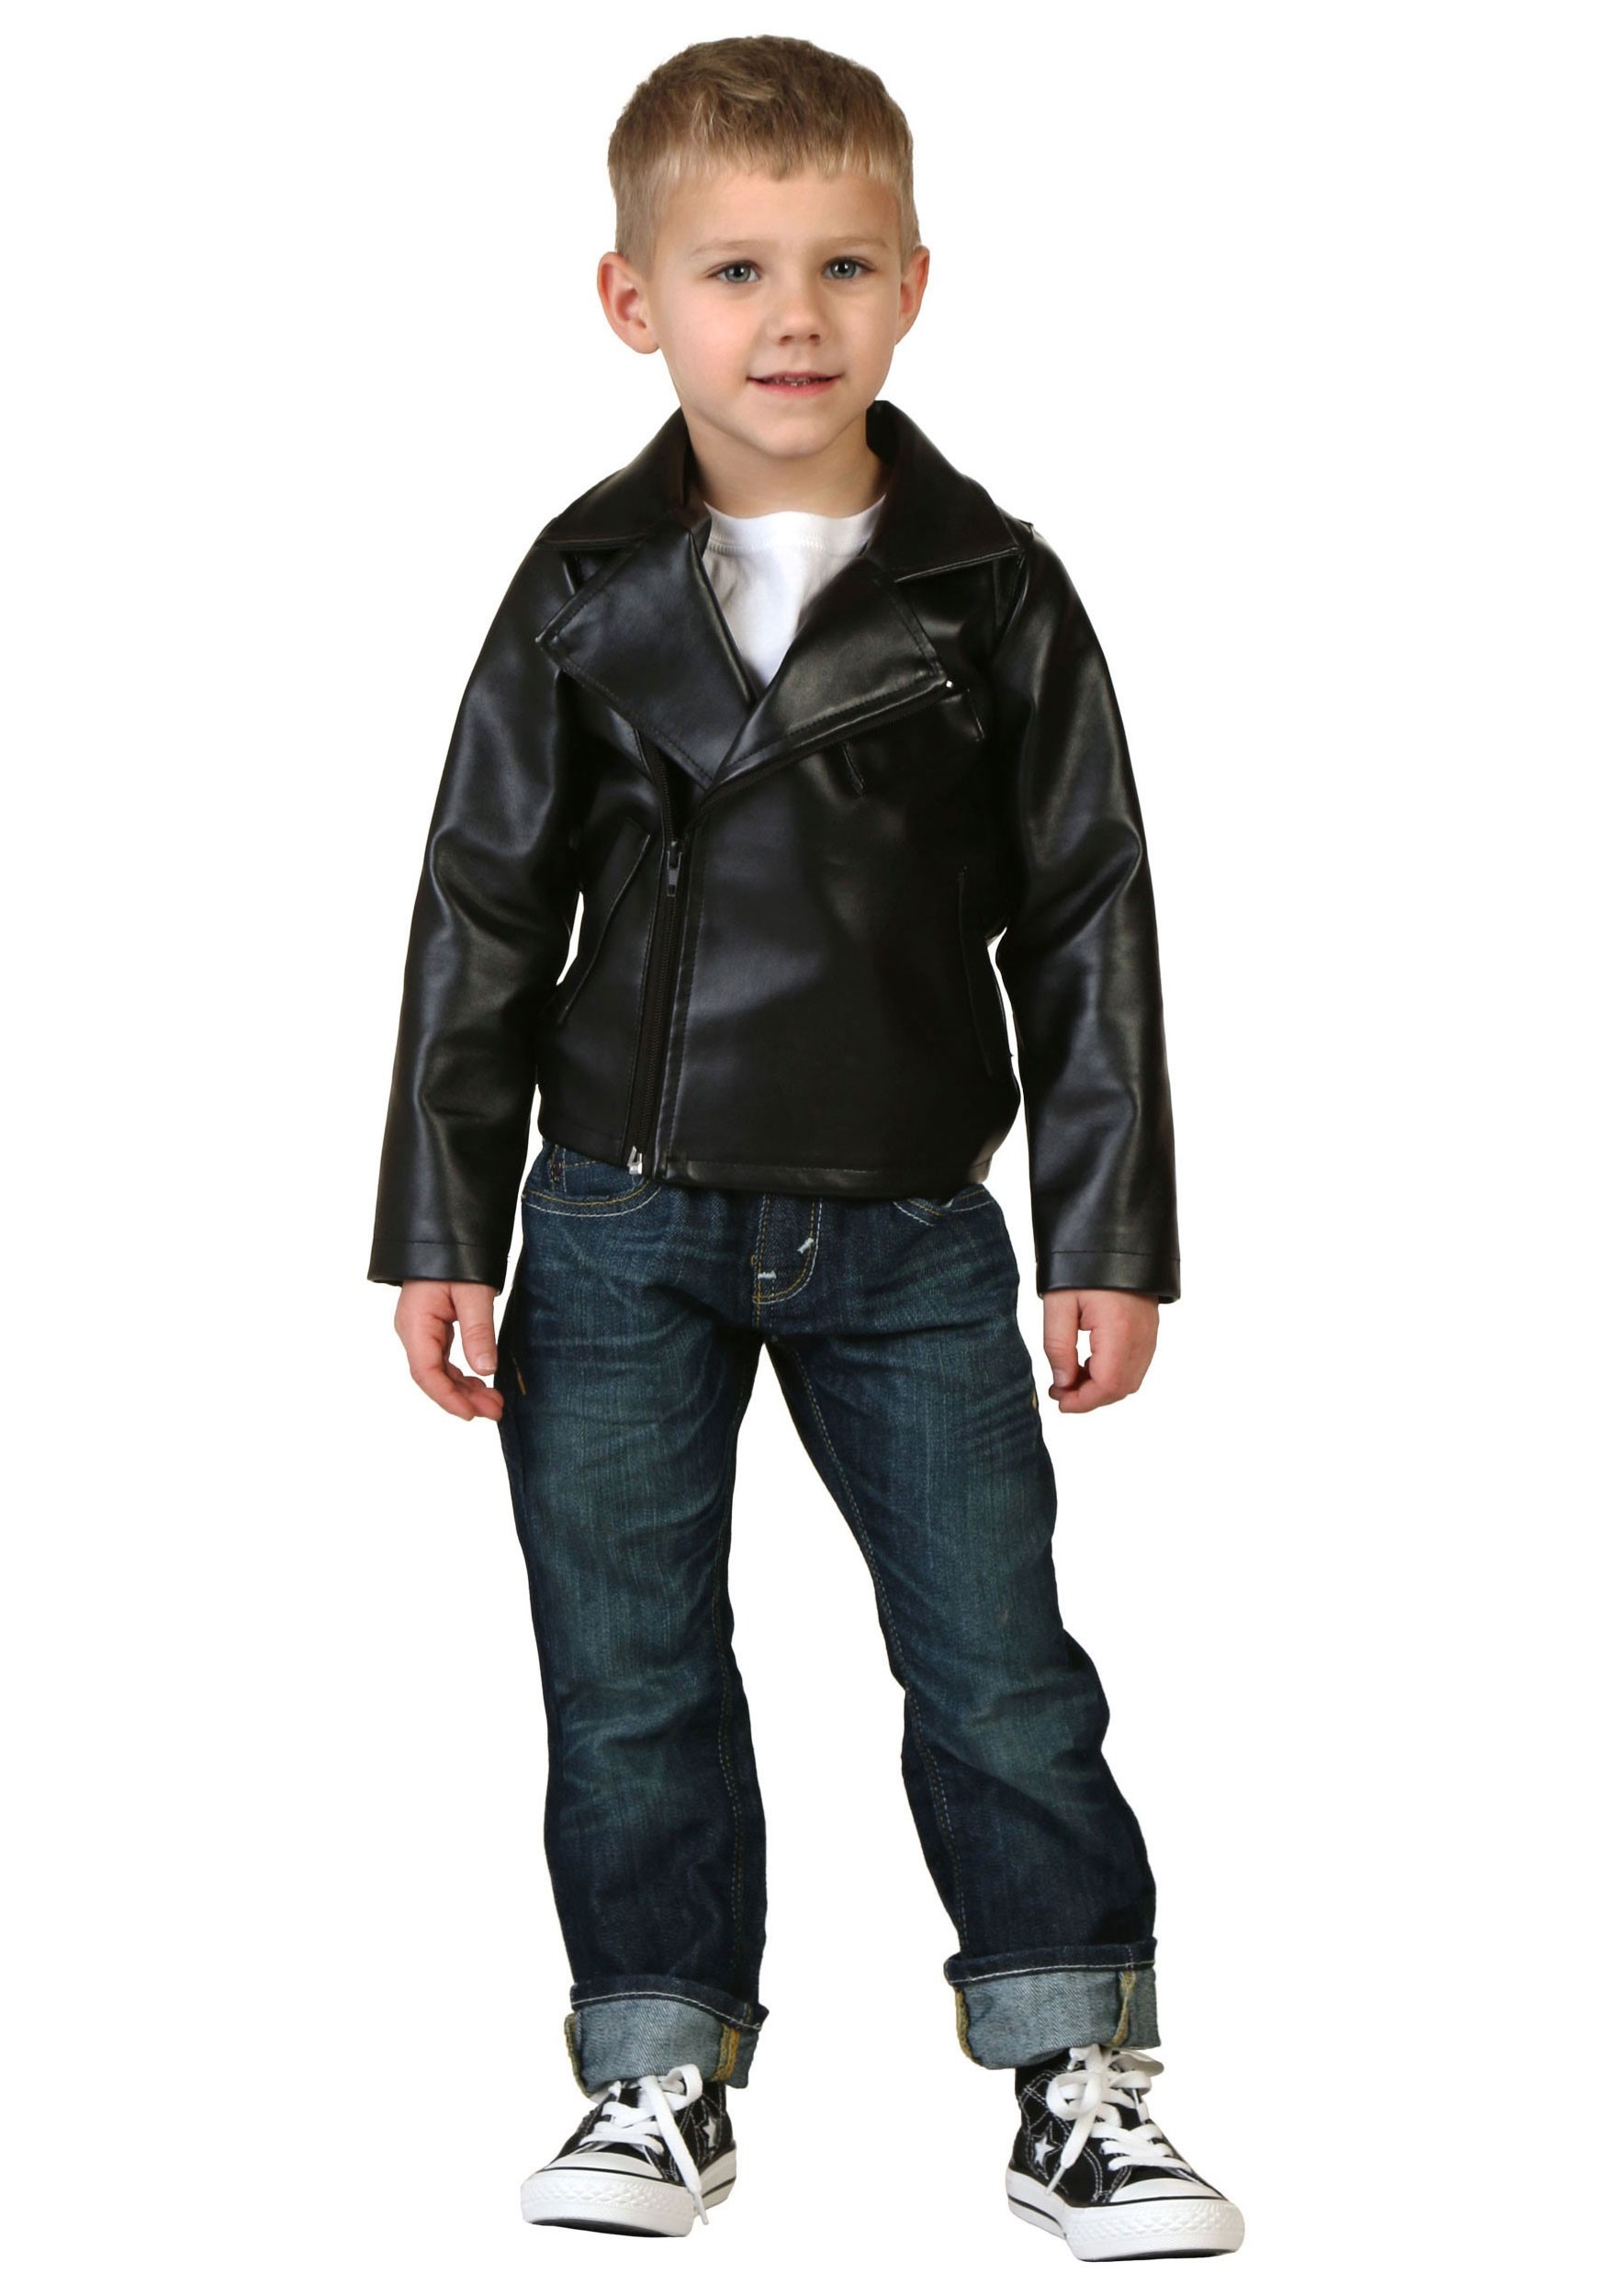 Toddler Grease T-Birds Jacket Costume , Officially Licensed Costume